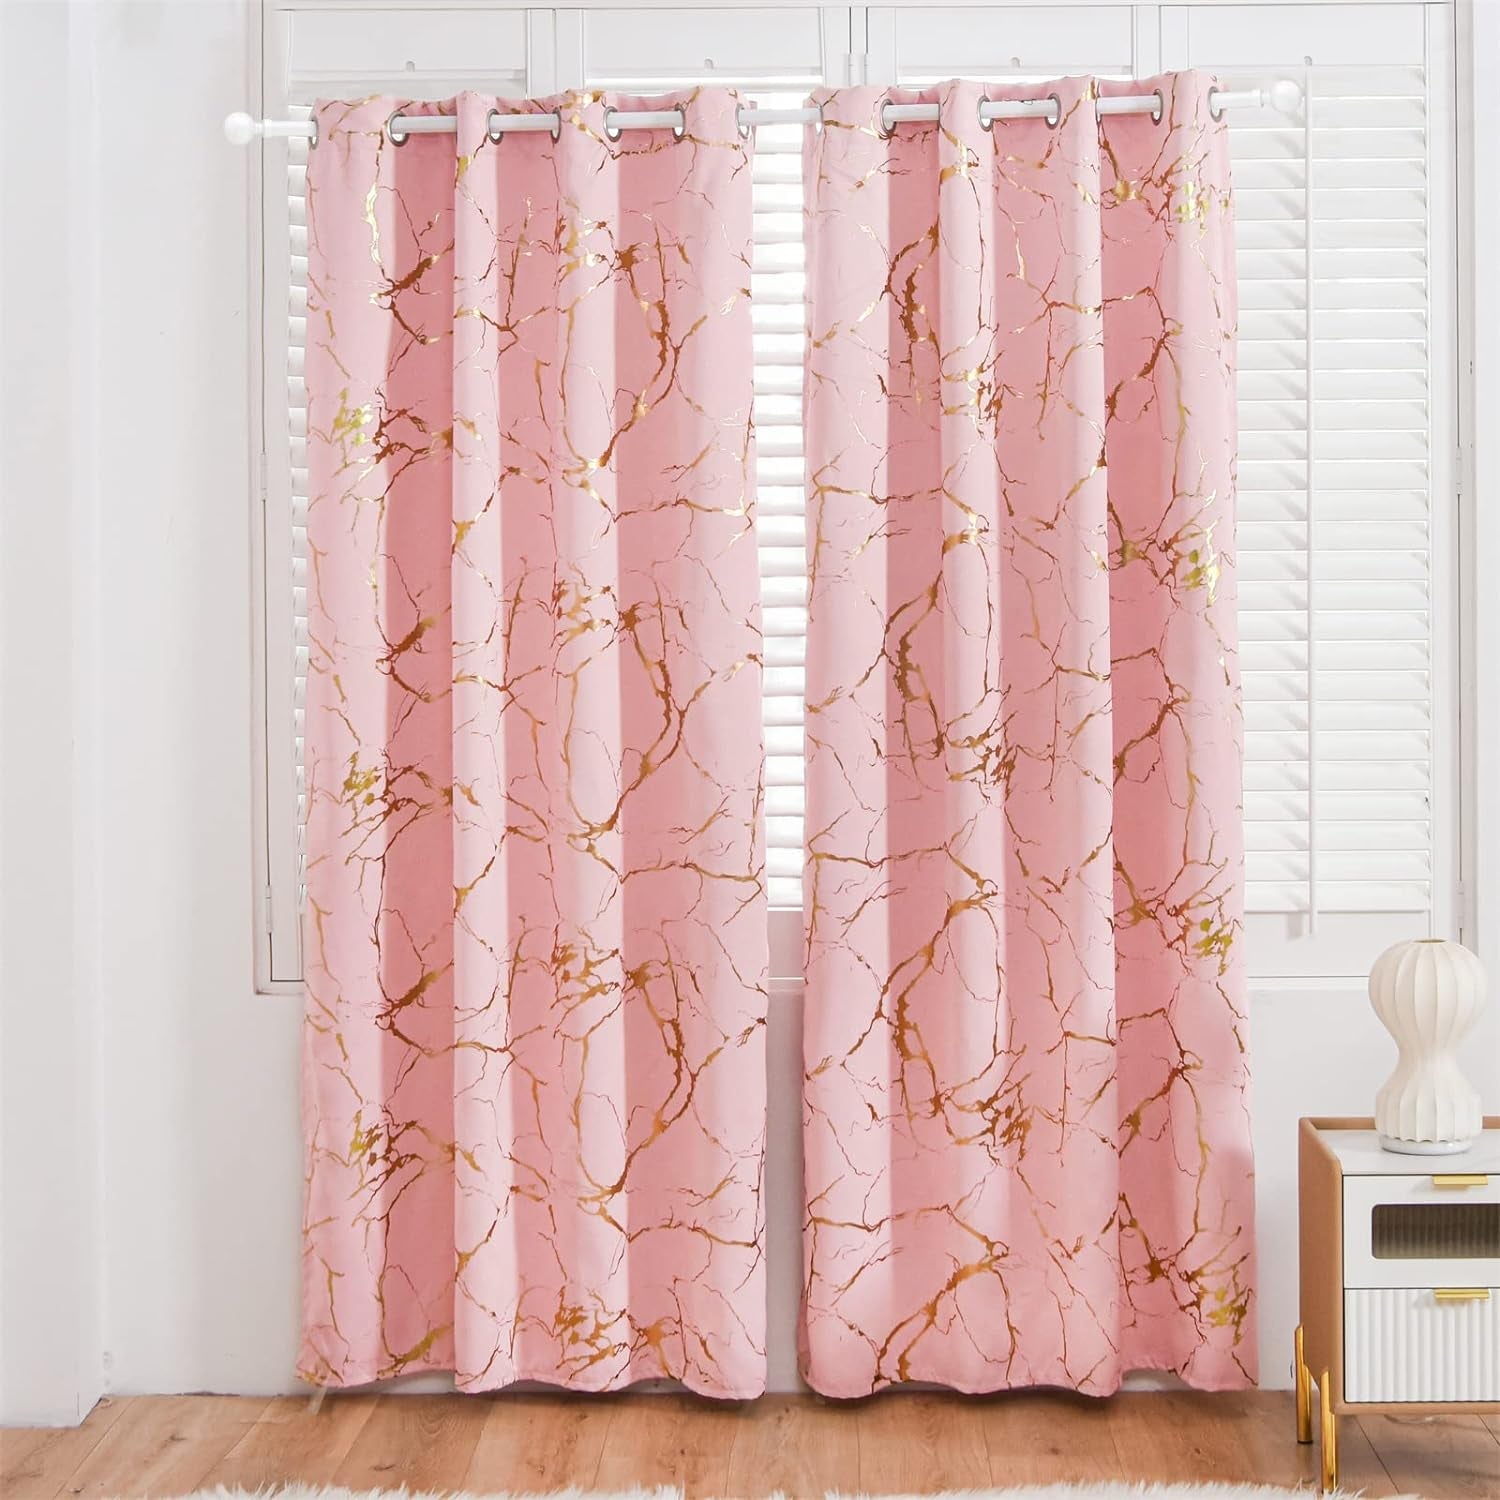 Aimuan Blush Gold Foil Curtains Printed Marble Grommet Blackout Curtain Panels Golden Metallic Glitter Drapery Window Drapes Valances for Bedroom Living Room, Pink 42X84